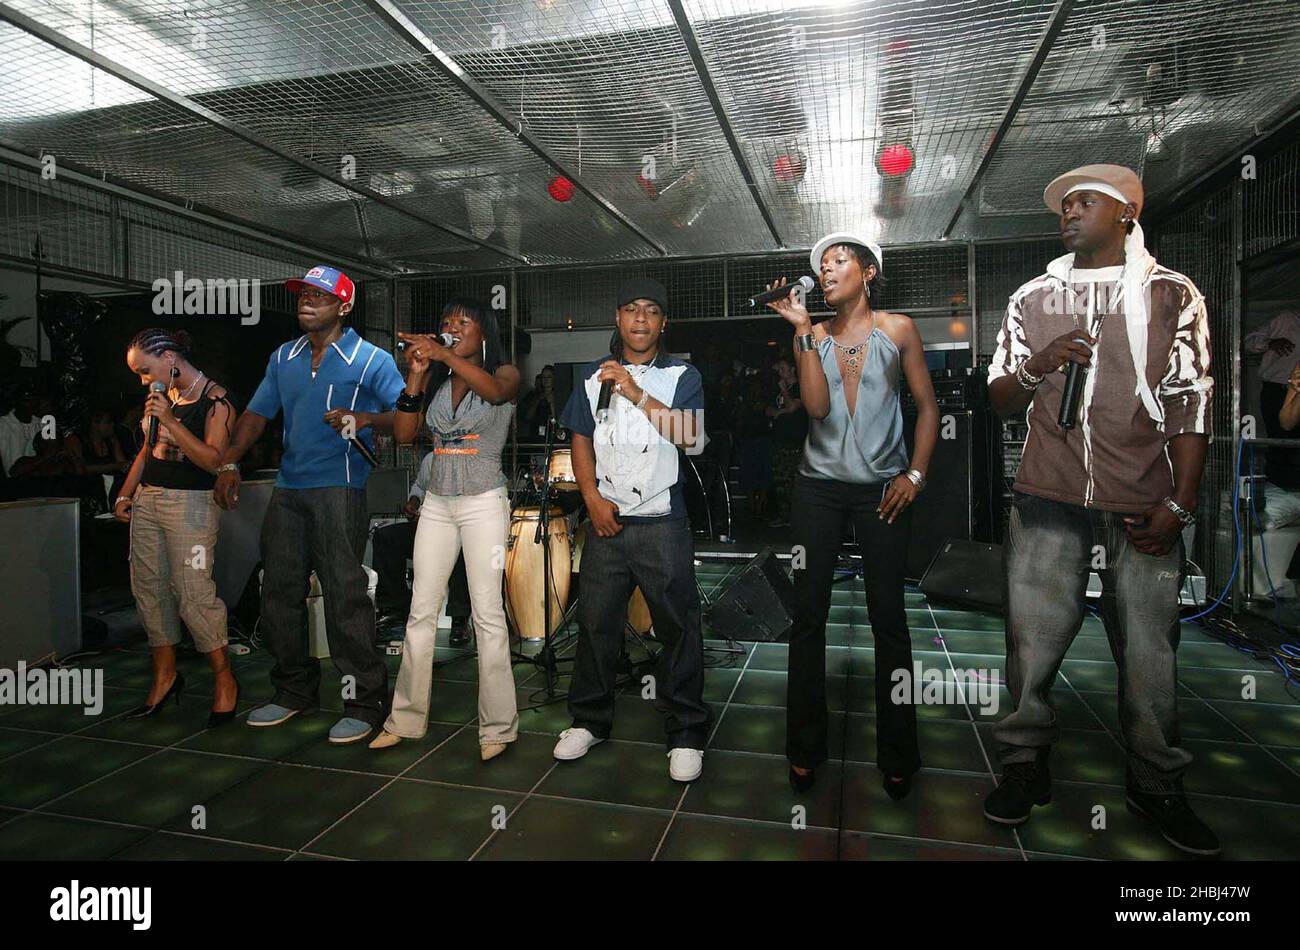 Big Brovaz perform and headline live on stage at the MTV Base Lounge Tantra  Kingly Street London Stock Photo - Alamy